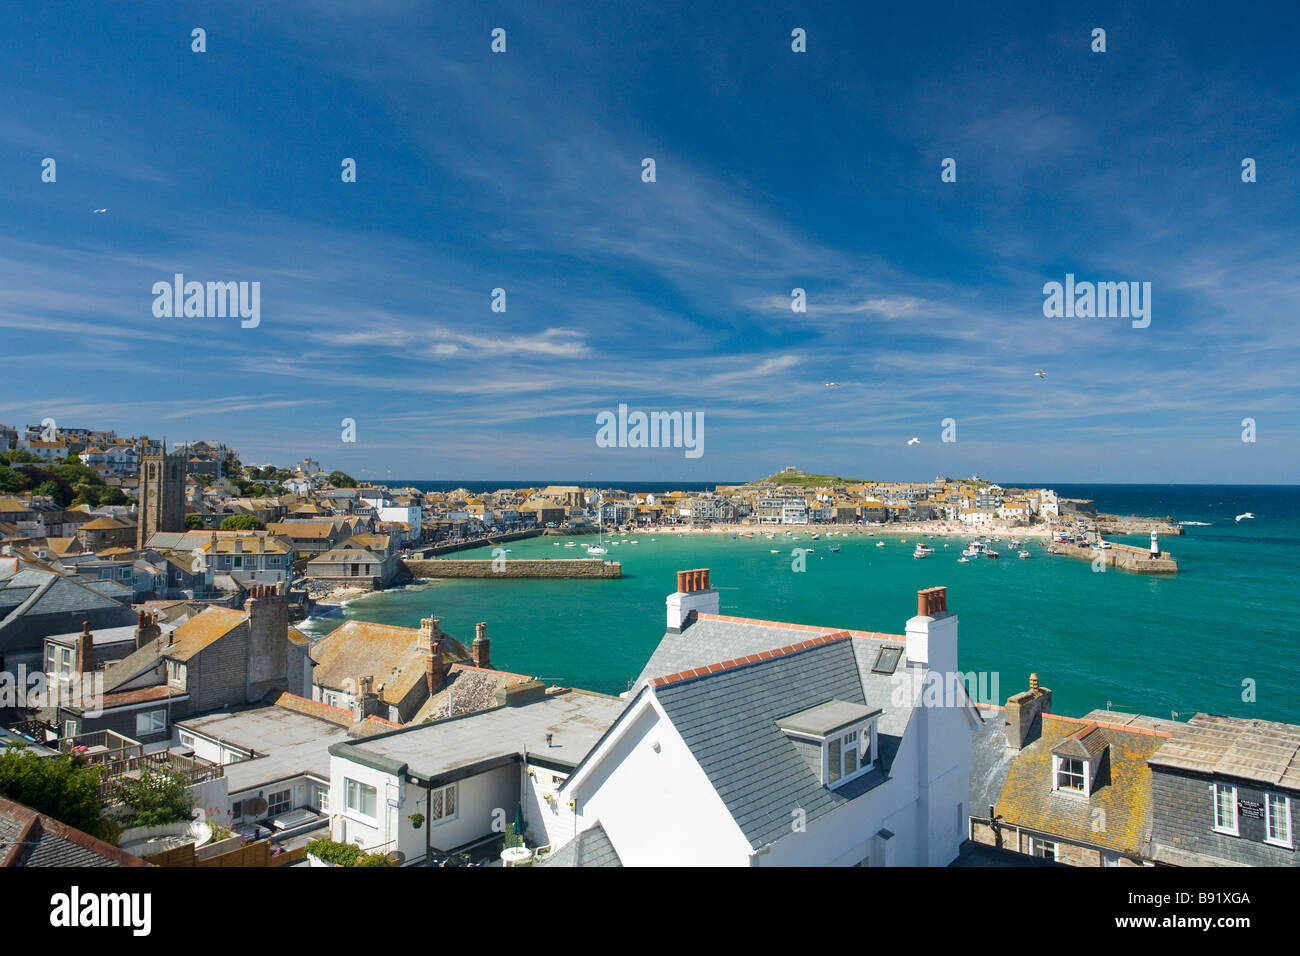 Old harbor harbour town summer sun St Ives Cornwall West Country England UK United Kingdom GB Great Britain British Isles Europe Stock Photo